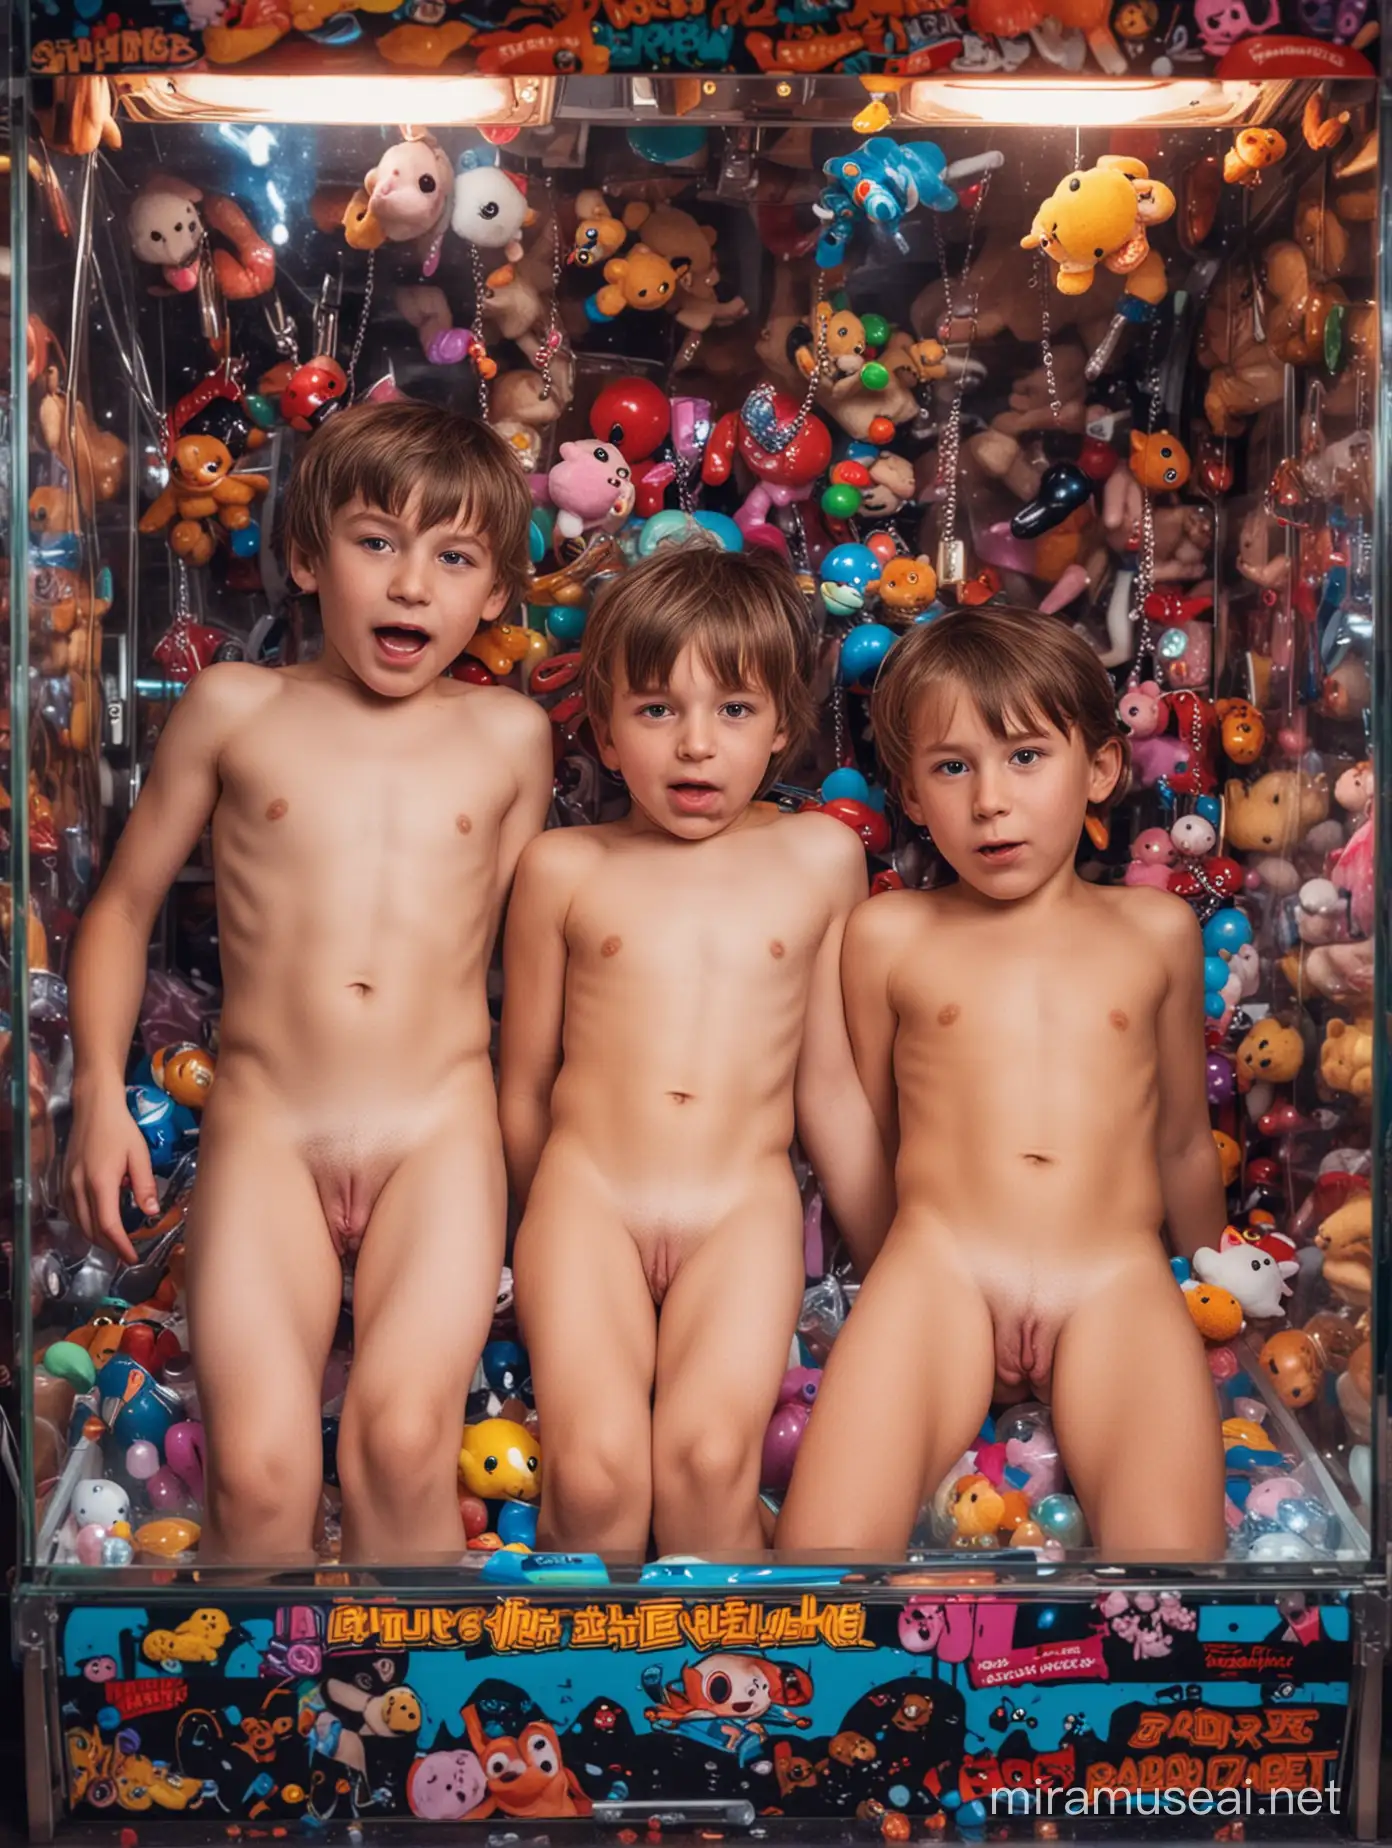 two children bottom naked traped in a arcade claw machine, they are lying down in all the prices, they are surrounded by a lot of prices, they bodys are covered